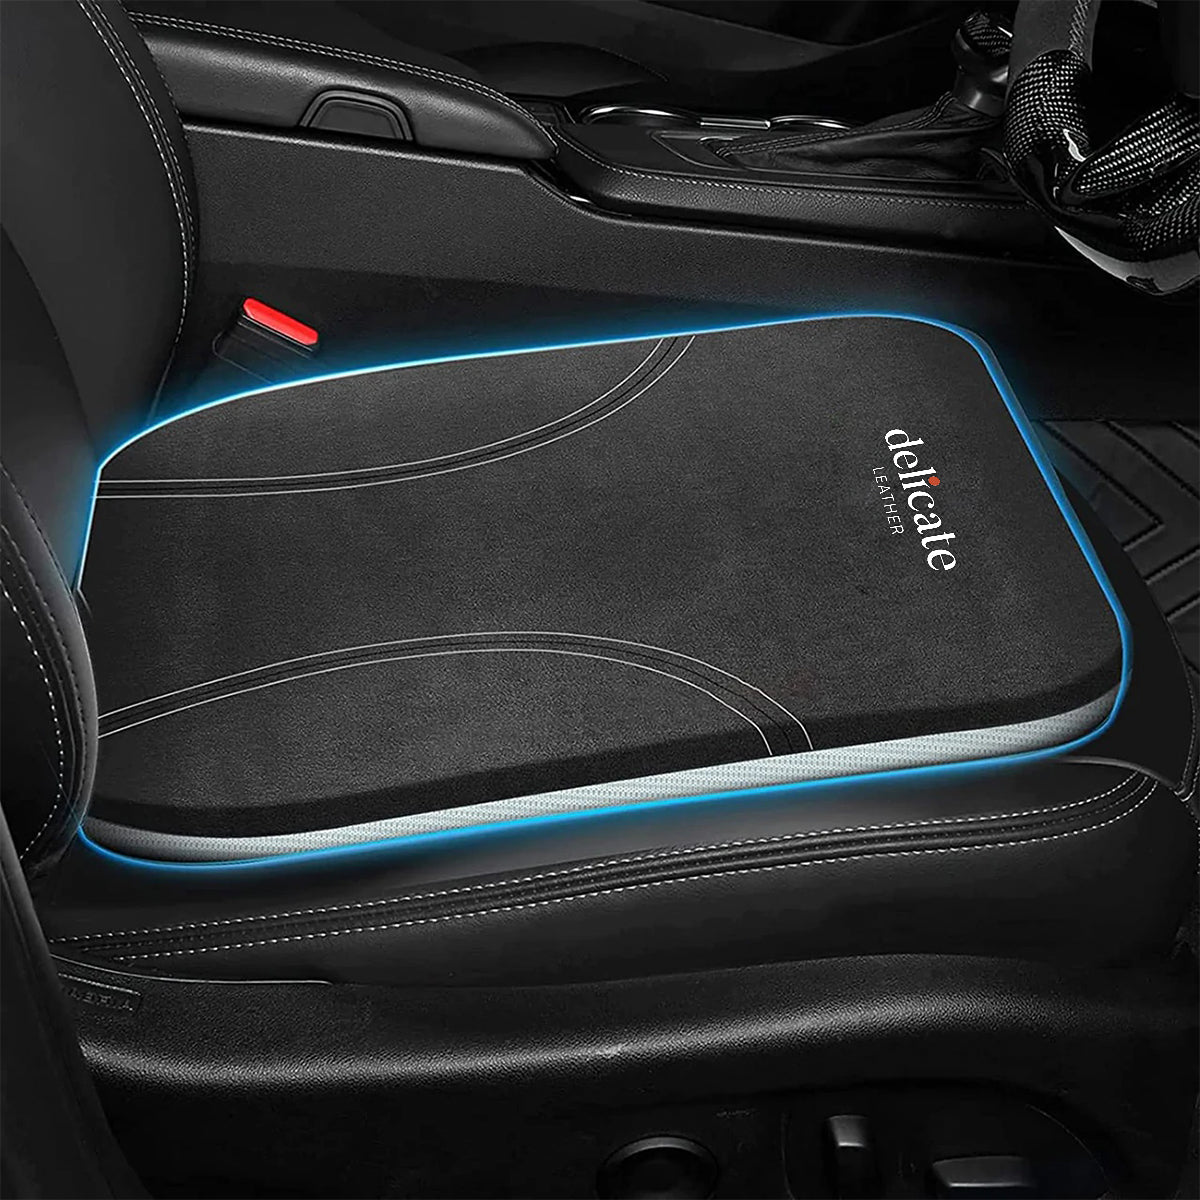 Mitsubishi Car Seat Cushion: Enhance Comfort and Support for Your Drive